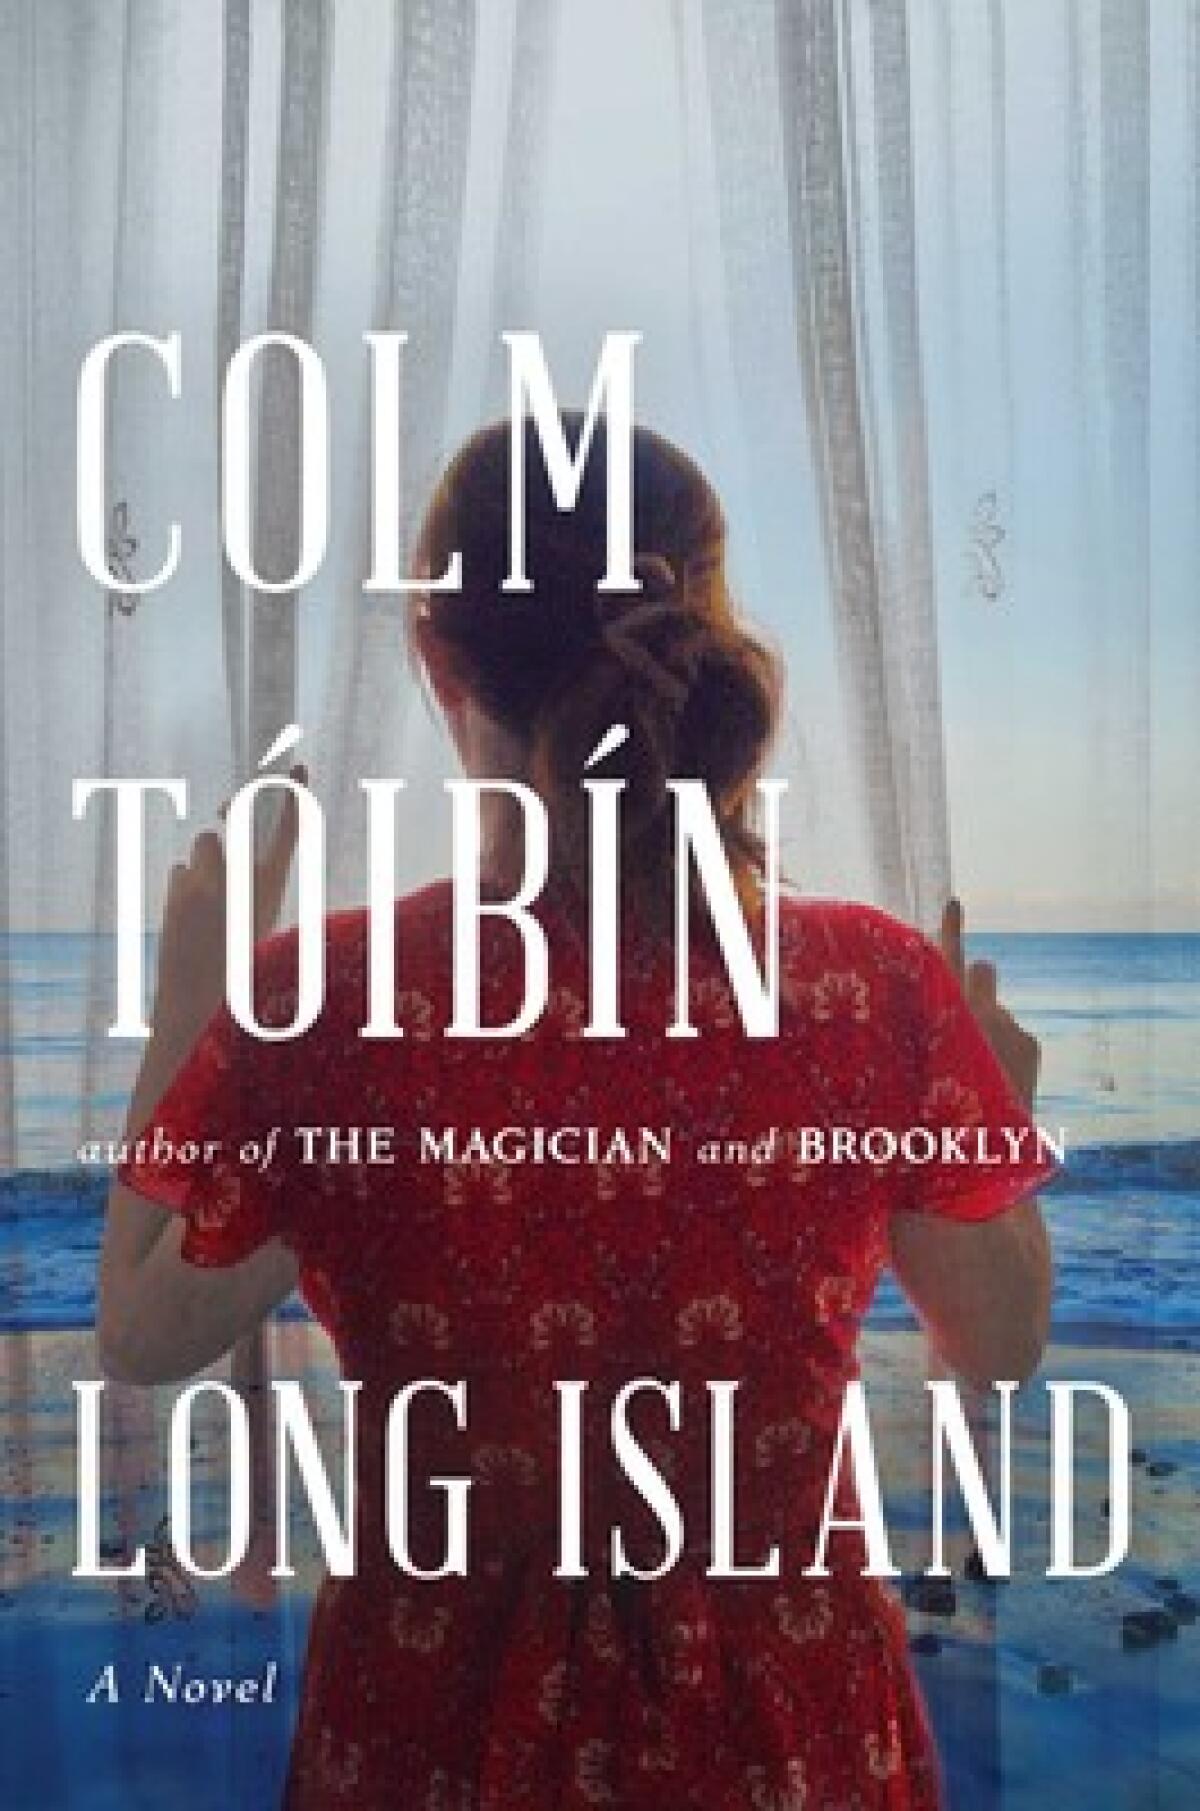 The cover of "Long Island"